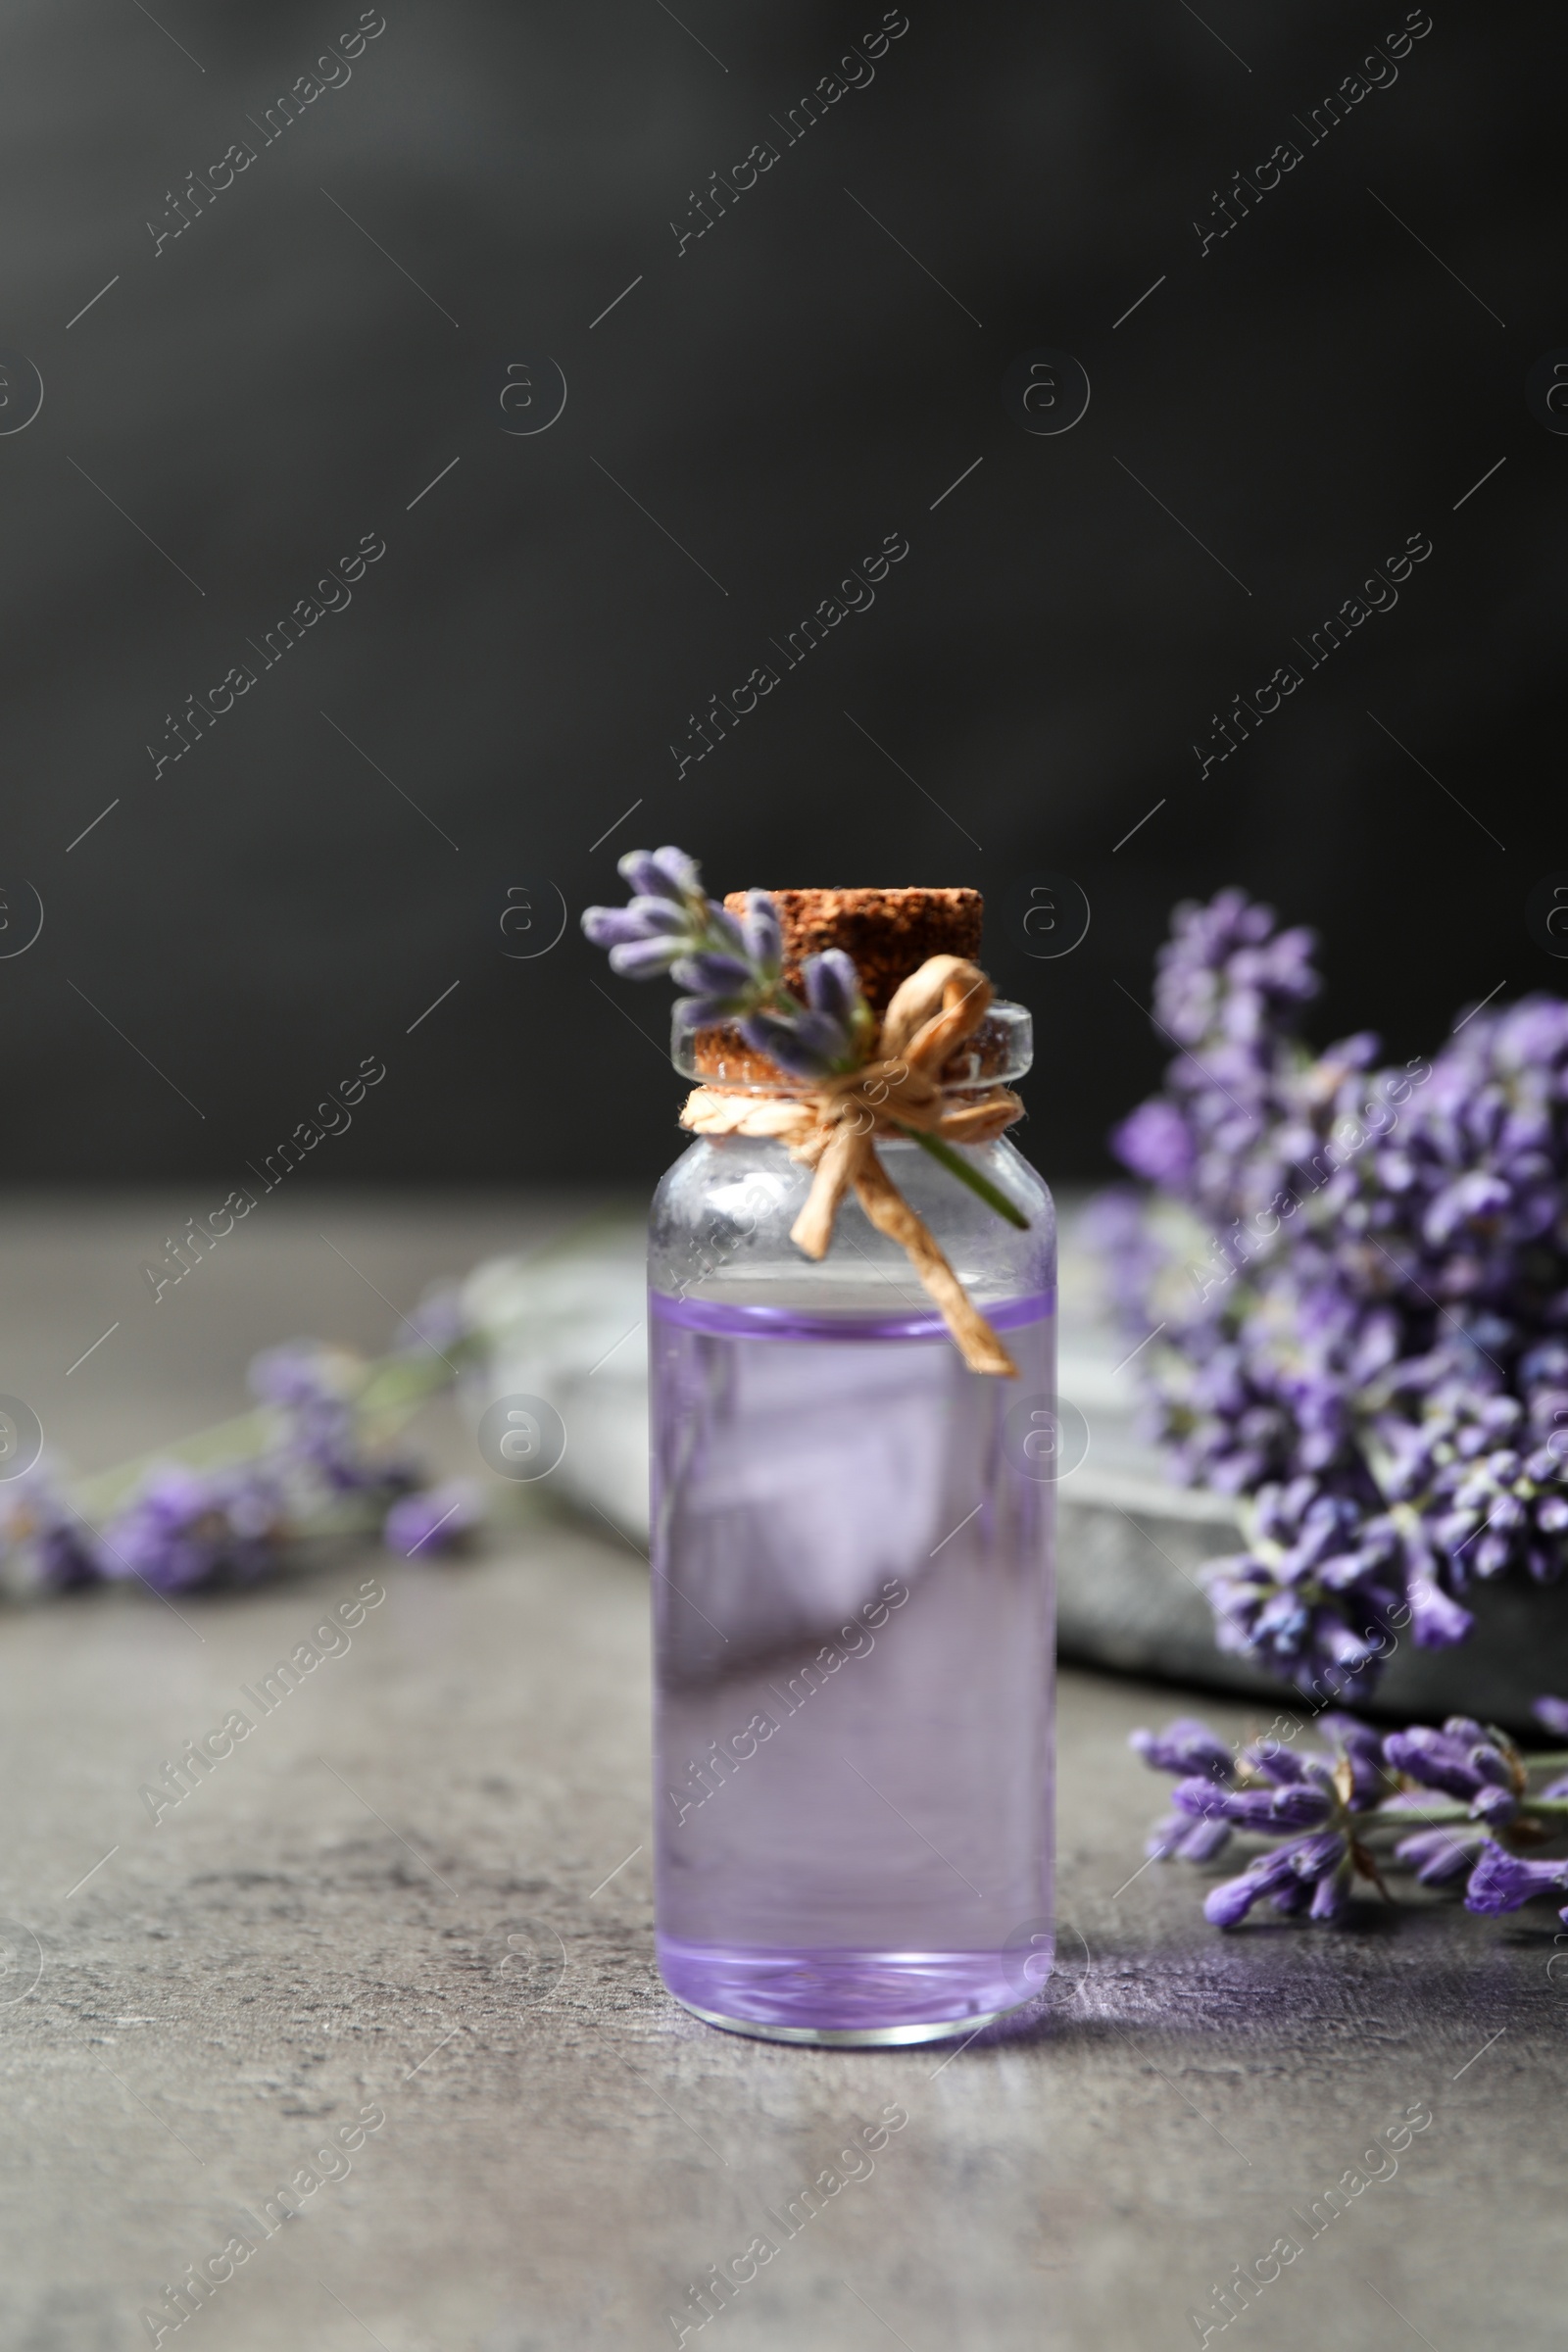 Photo of Bottle of essential oil and lavender flowers on grey stone table